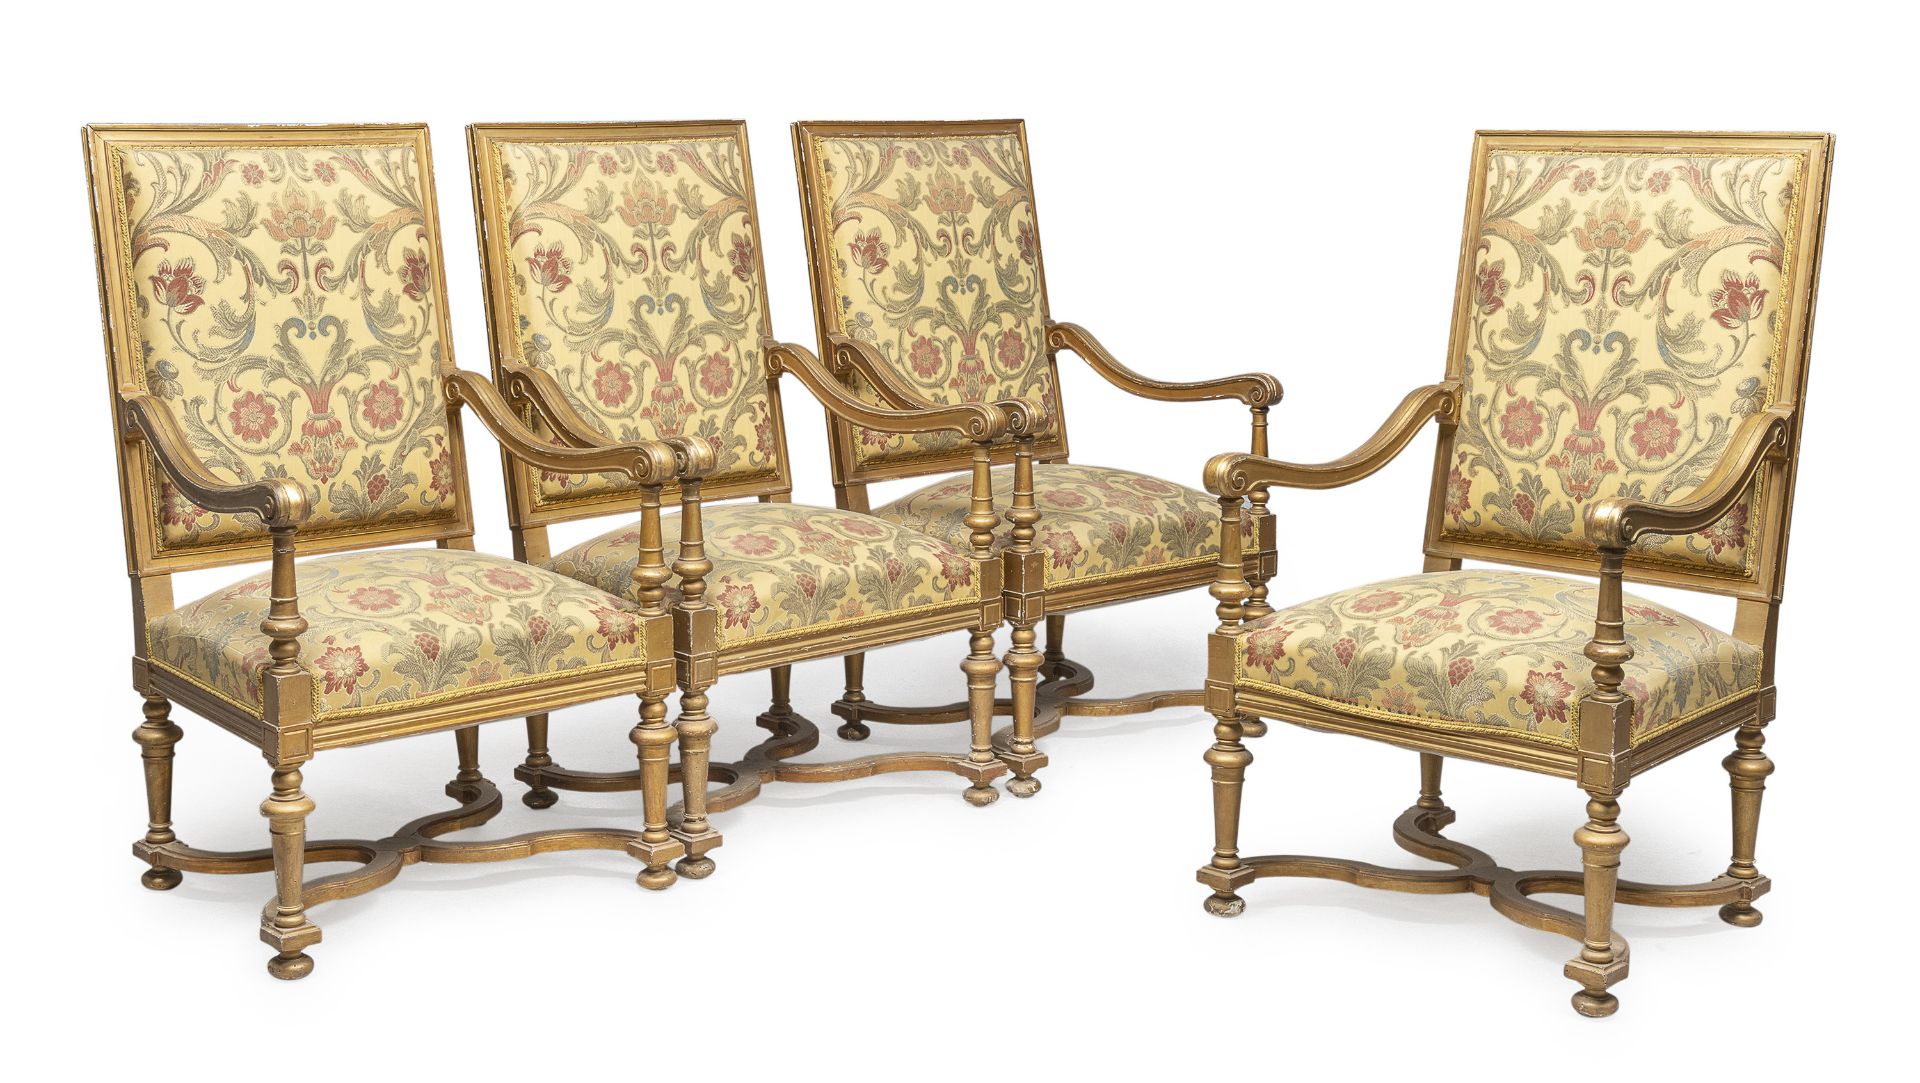 FOUR GILTWOOD ARMCHAIRS END OF THE 19TH CENTURY